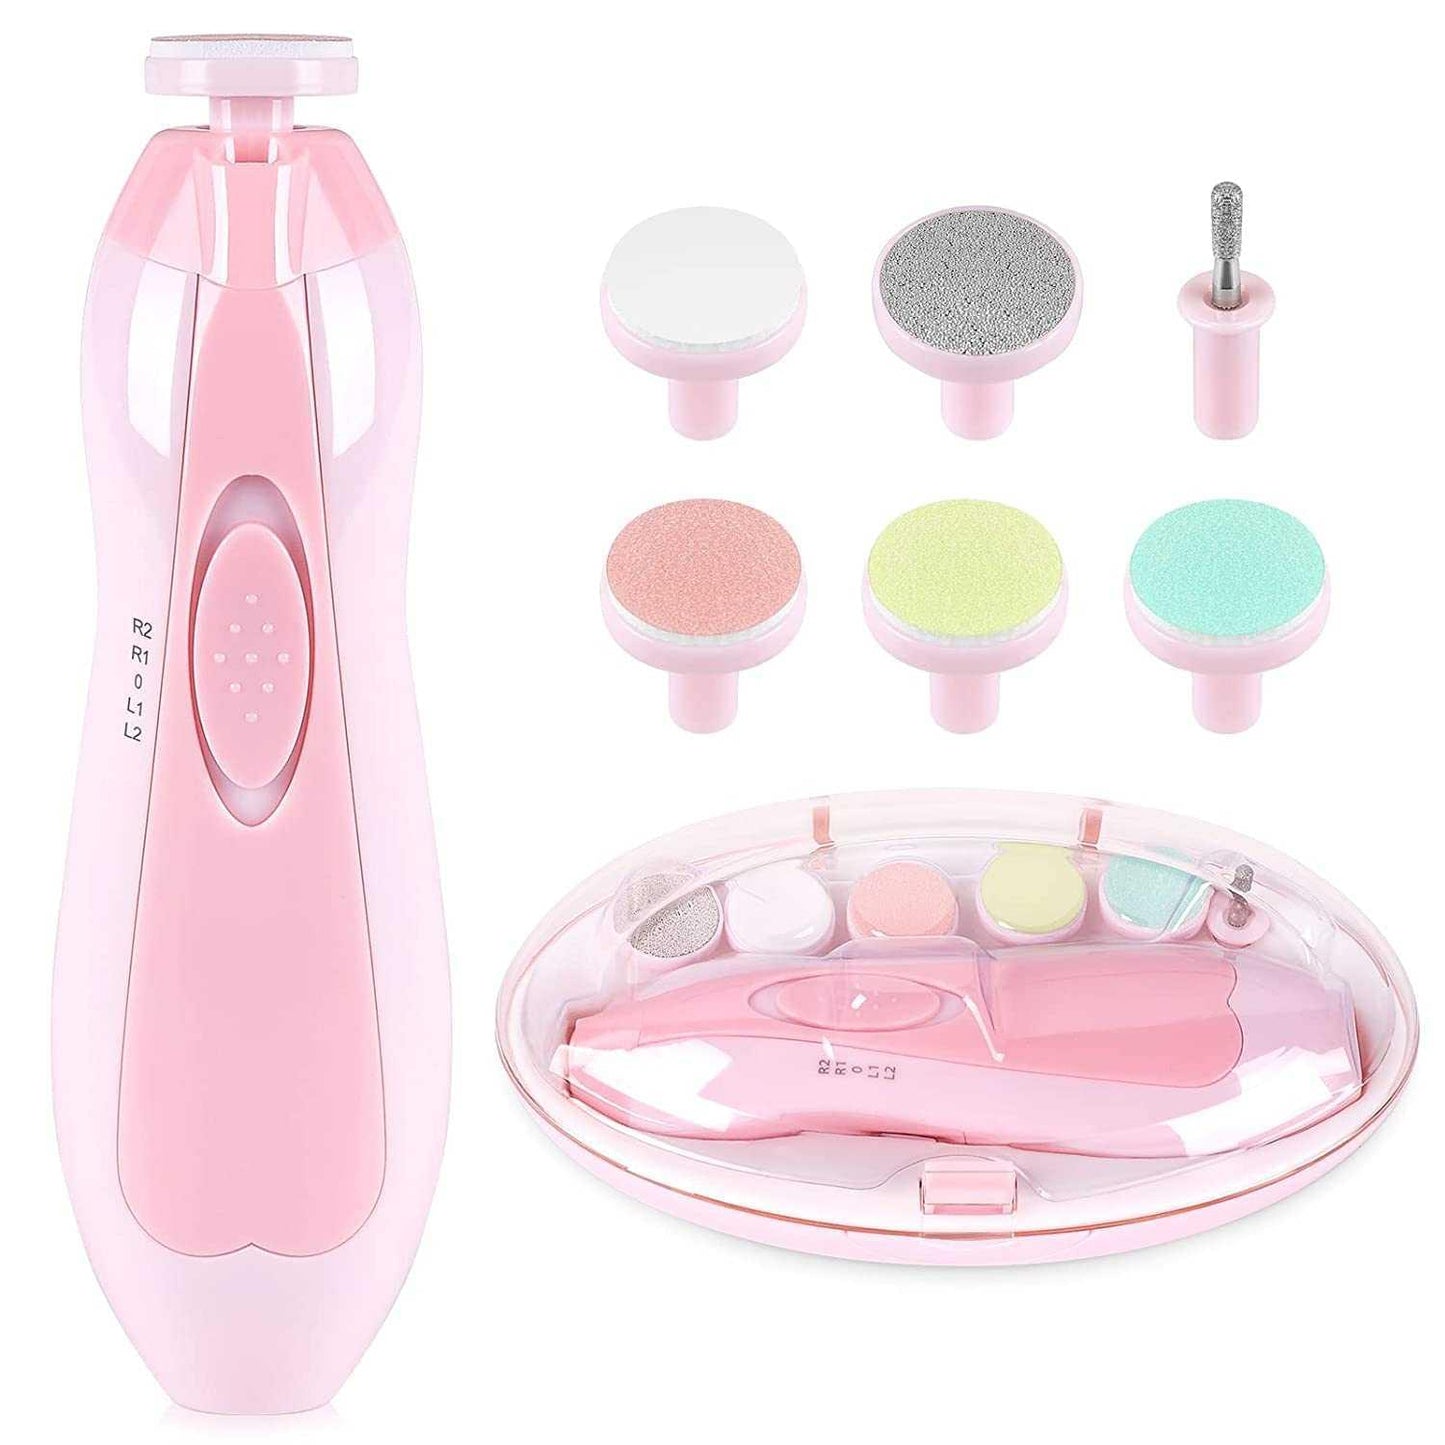 Electric baby nail trimmer